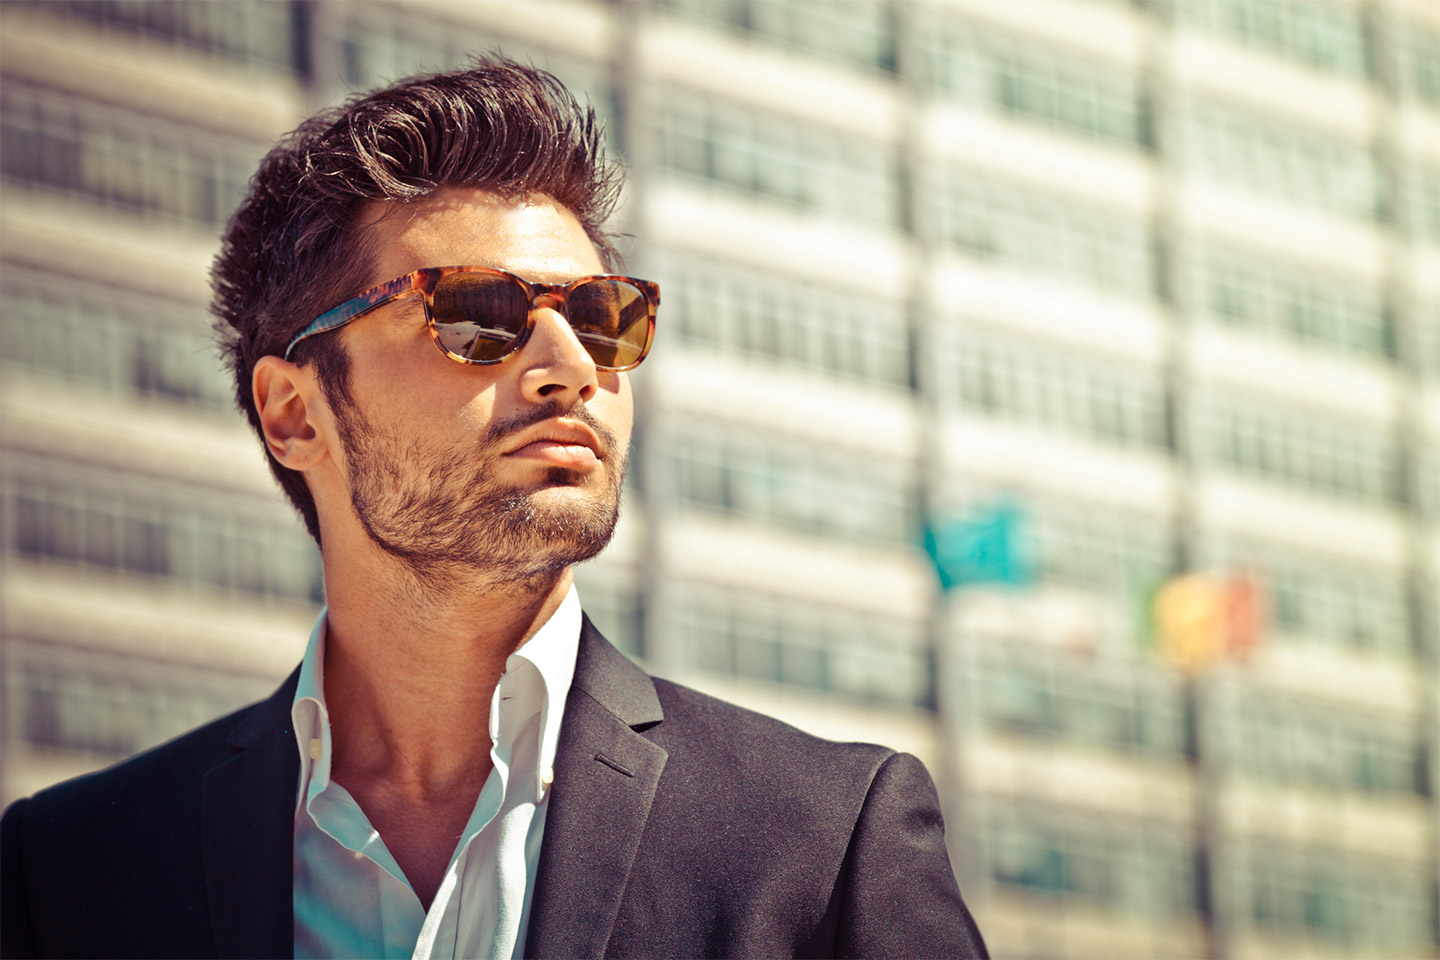 Handsome man wearing sunglasses with nice hair